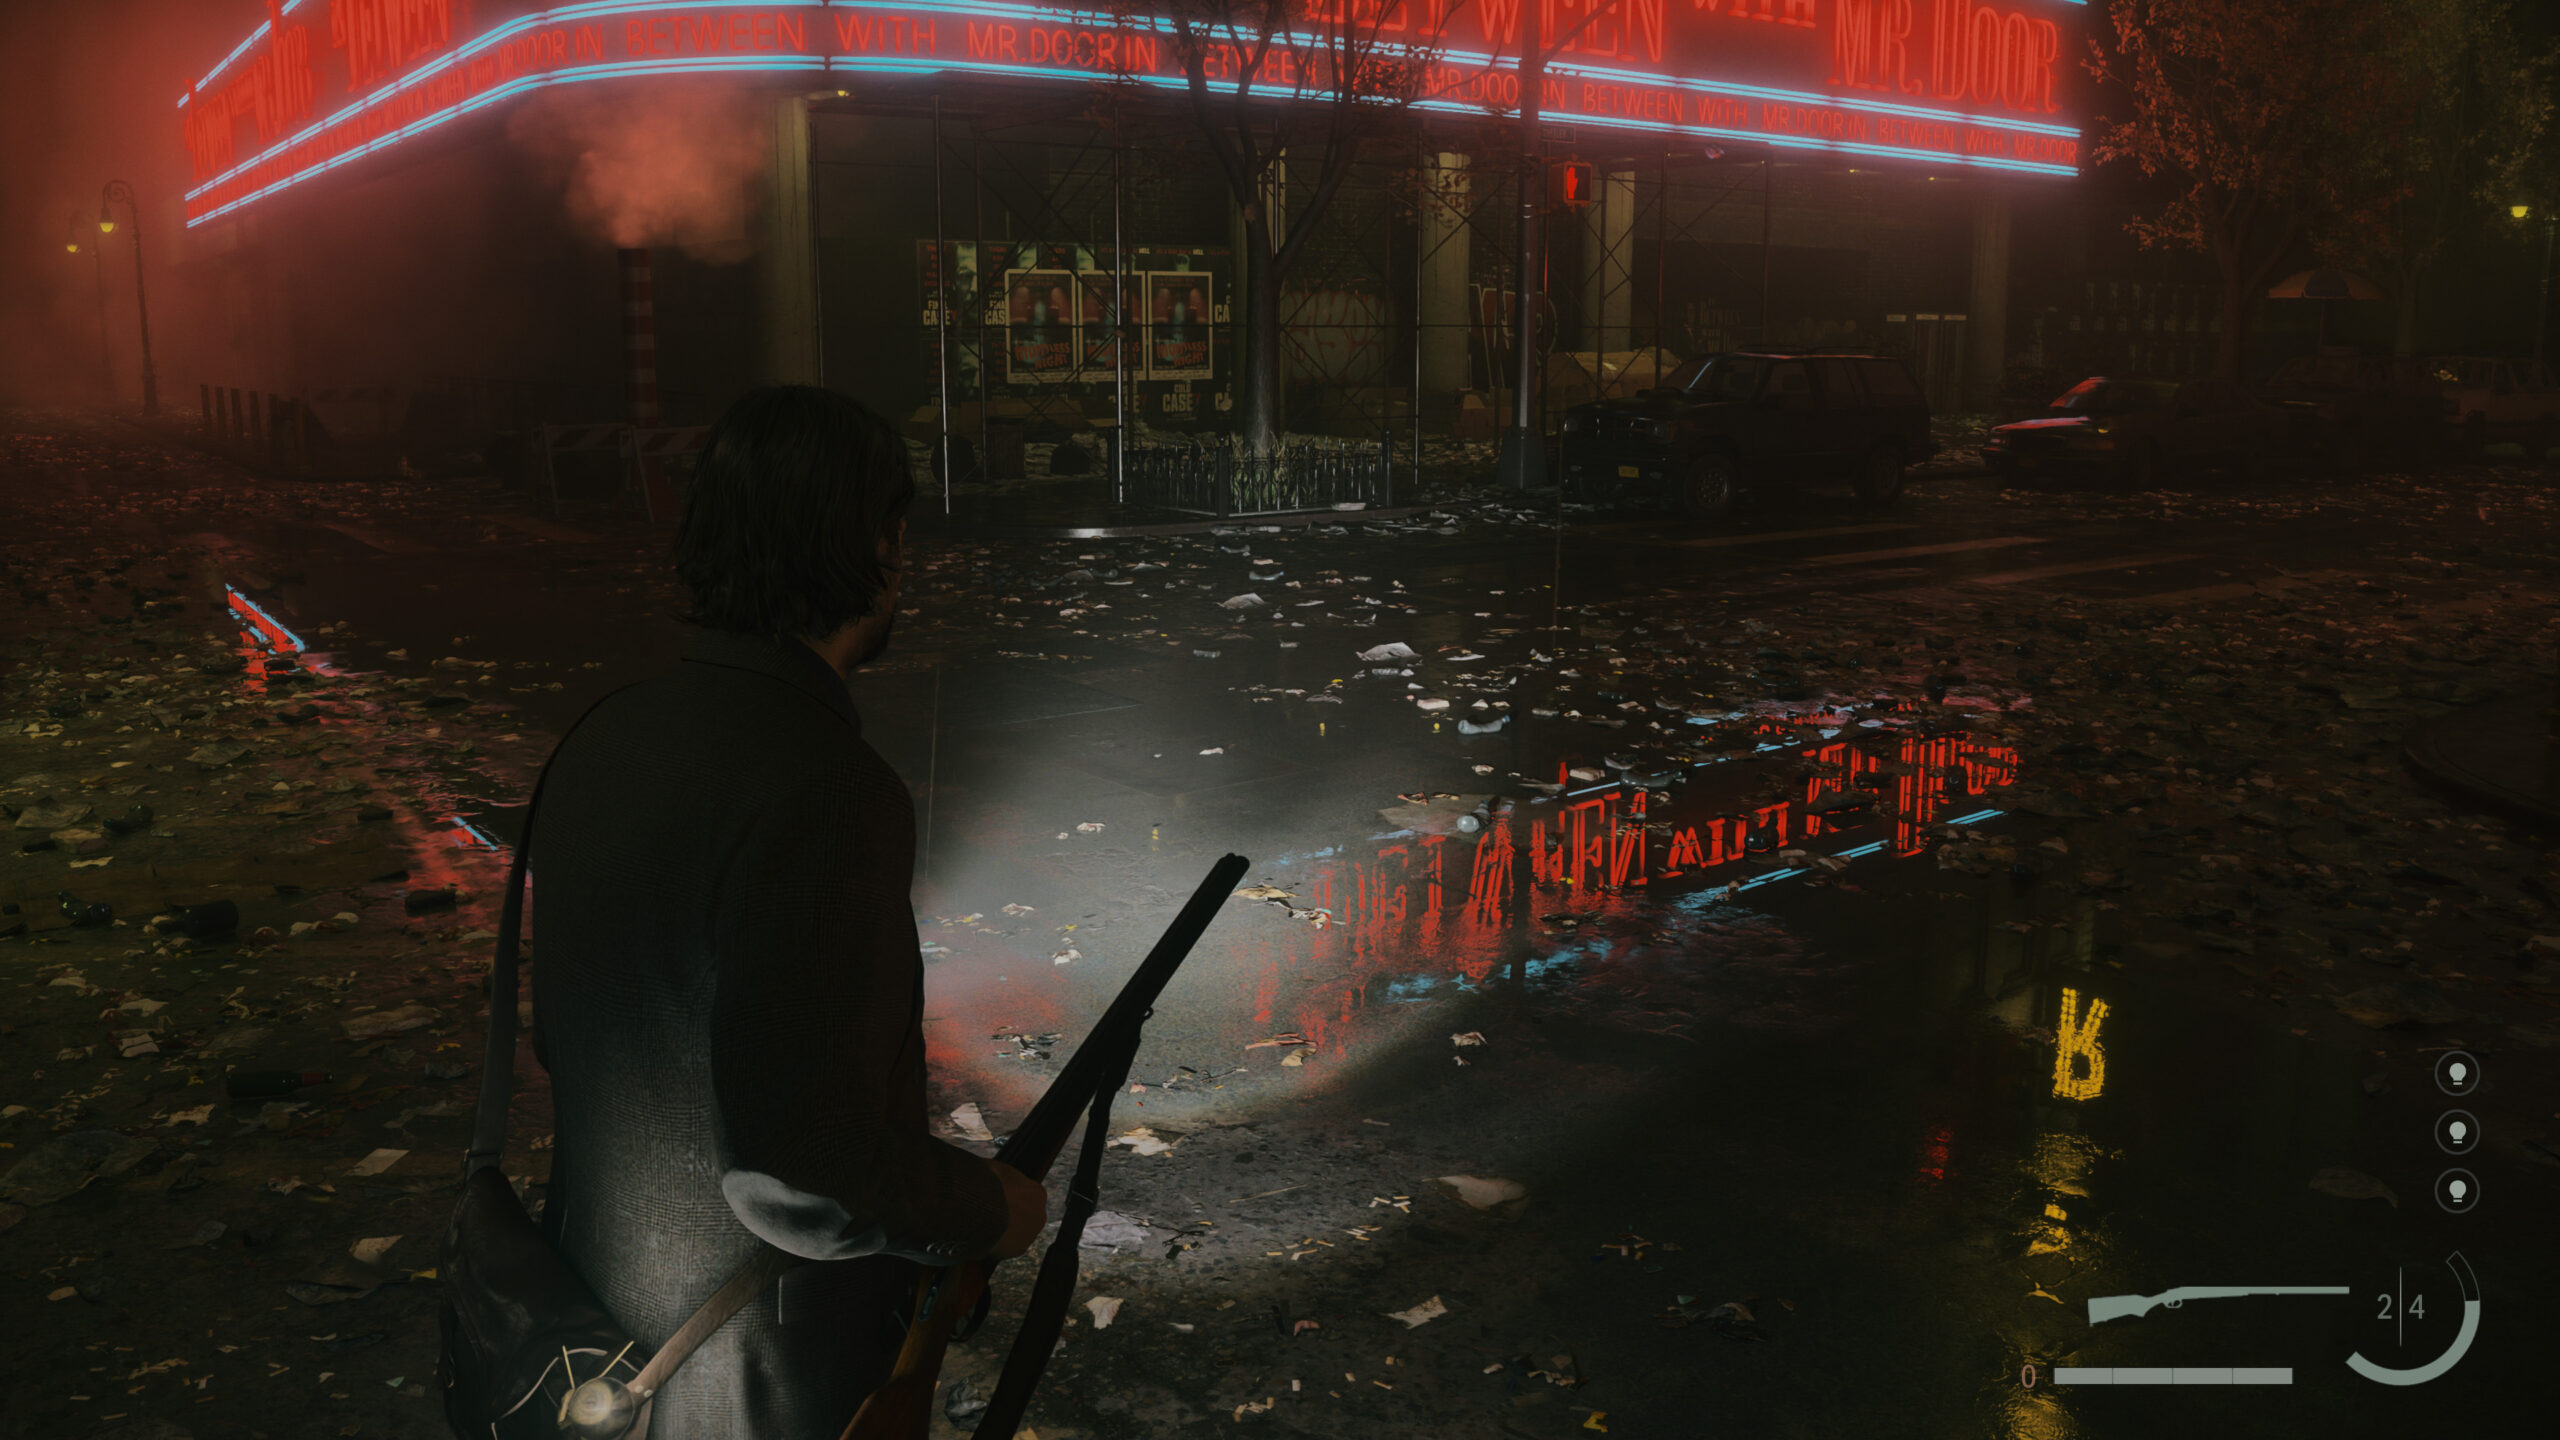 Alan Wake 2 with ray tracing on and DLSS 3.5 active.